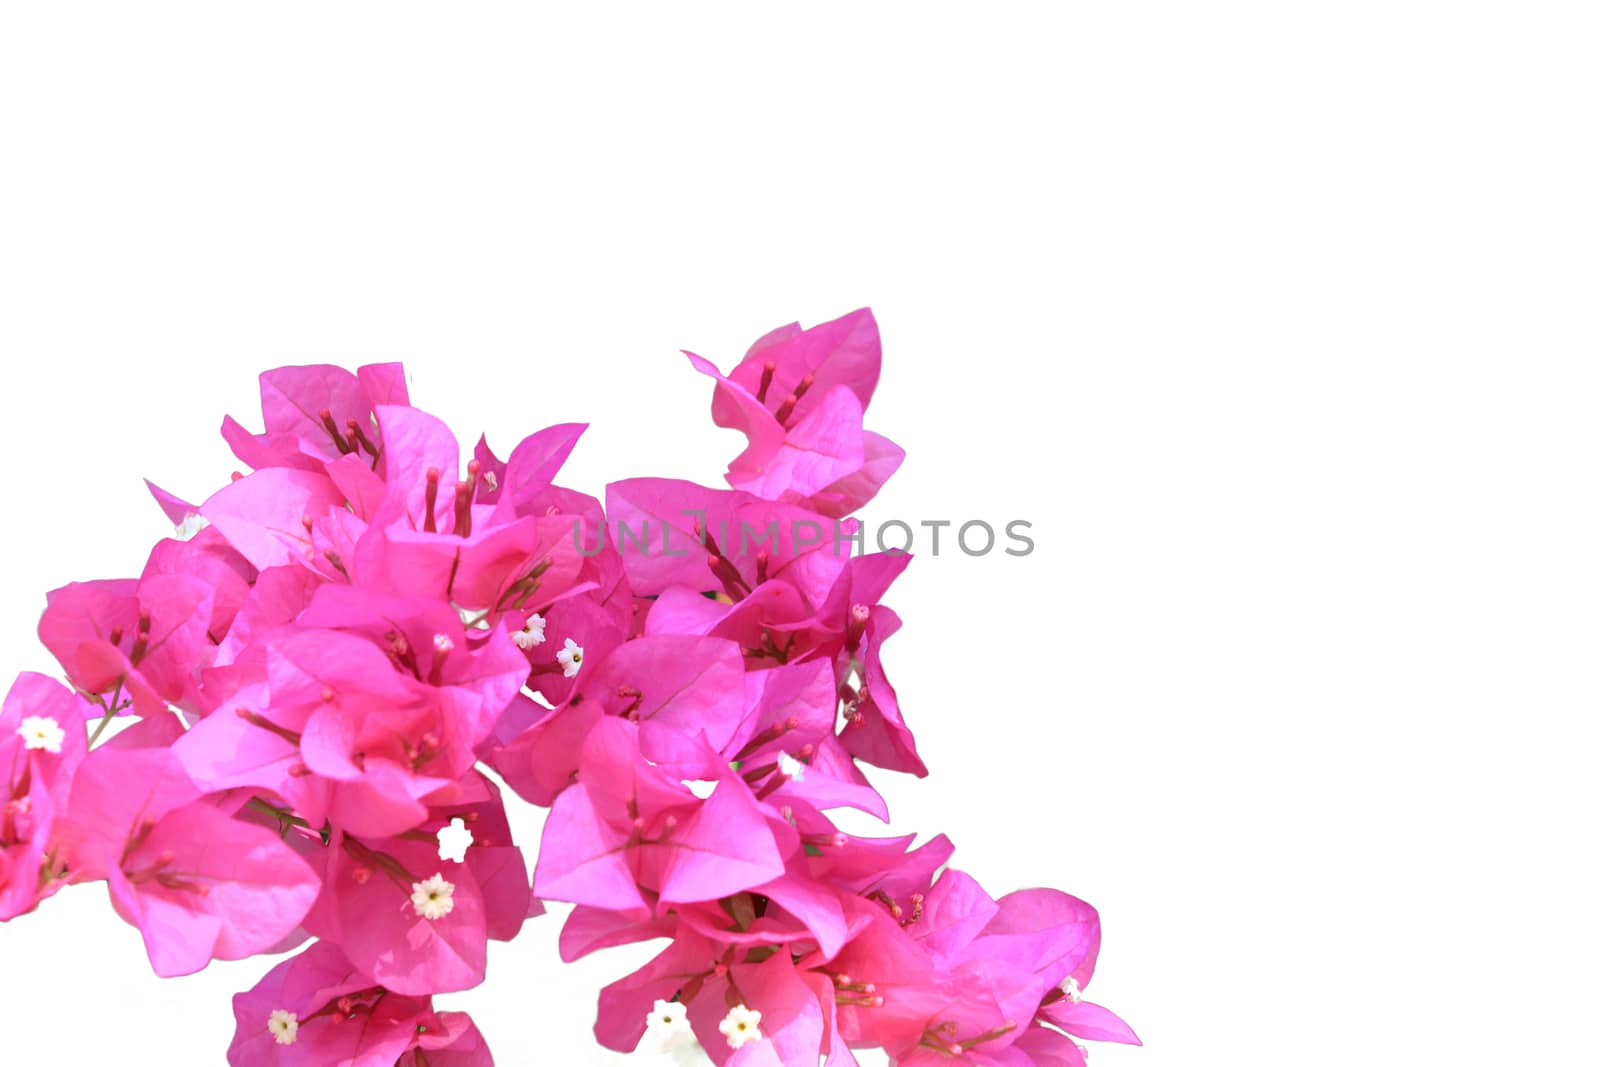 Beautiful pink red bougainvillea blooming isolated on white background, Bright pink red bougainvillea flowers as a floral background,Bougainvillea flowers texture and background,Close-up Bougainvillea tree with flowers isolated on white